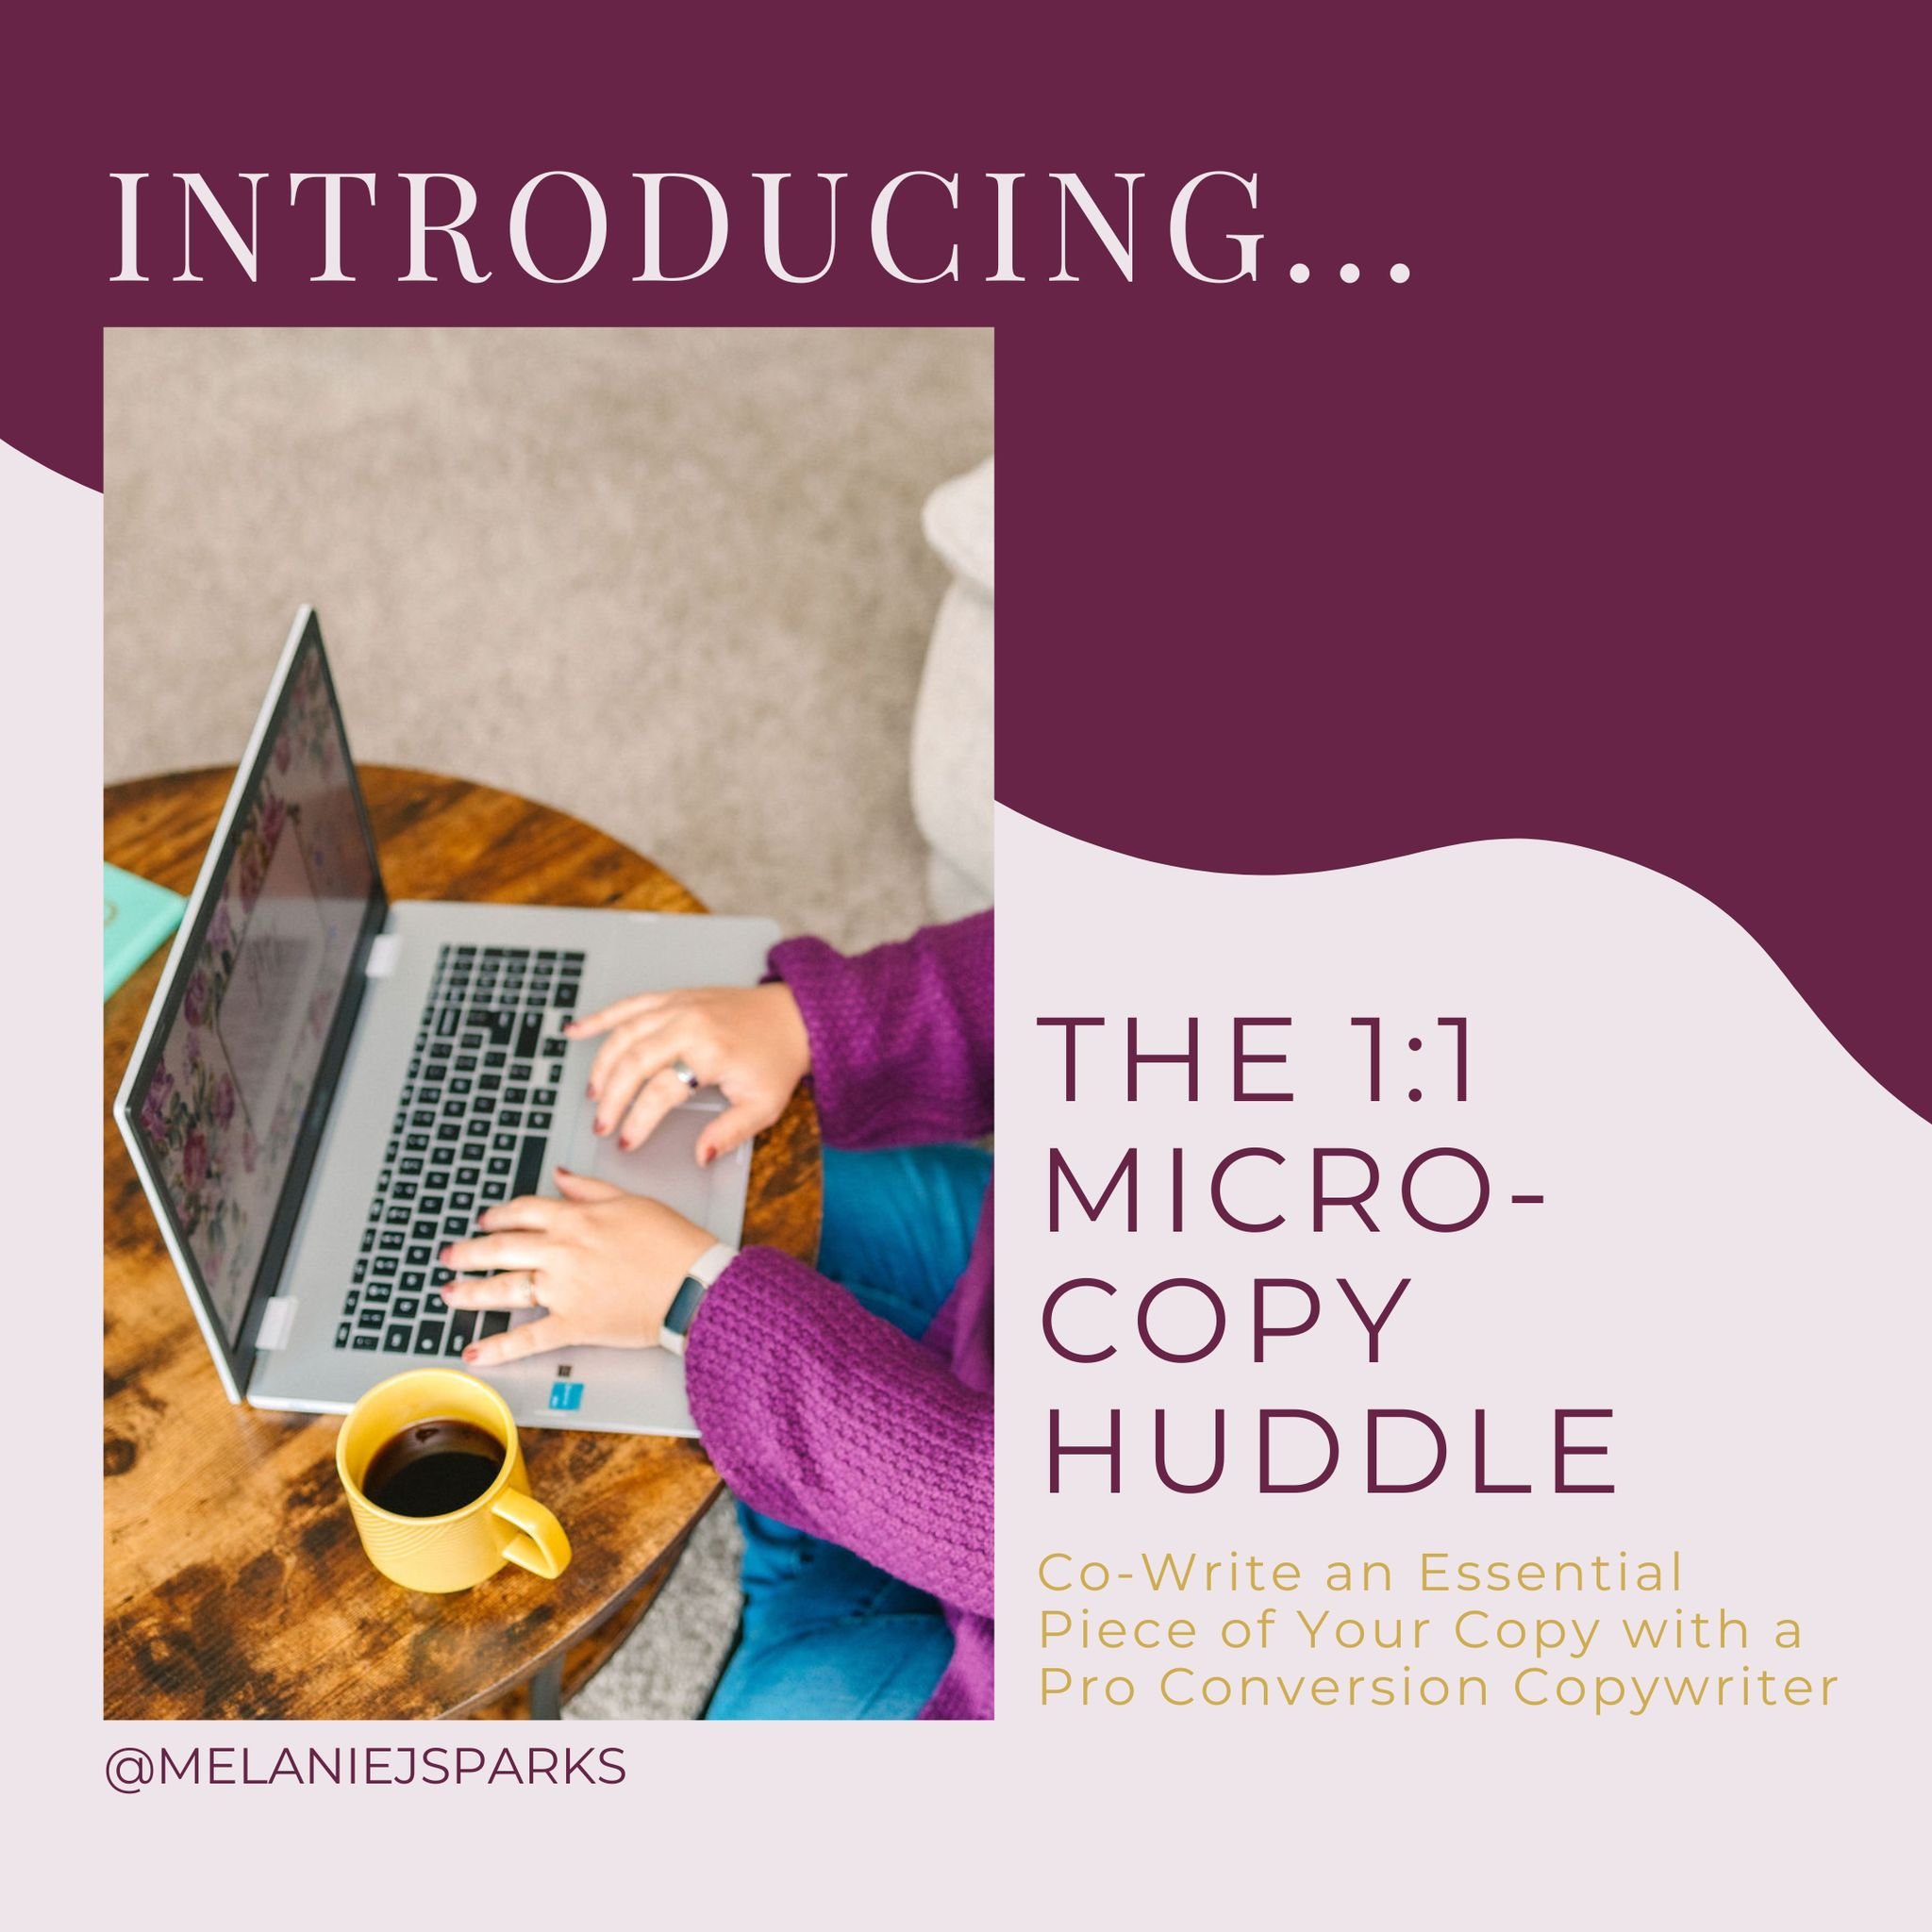 👉Does your About page need a makeover?
👉Need help with an email about a sticky situation? 
👉 Want to nail a sales email or hash out a section of your sales page?

Introducing the 1:1 Micro-Copy Huddle 👀 - &gt; Co-Write an Essential Piece of Your 